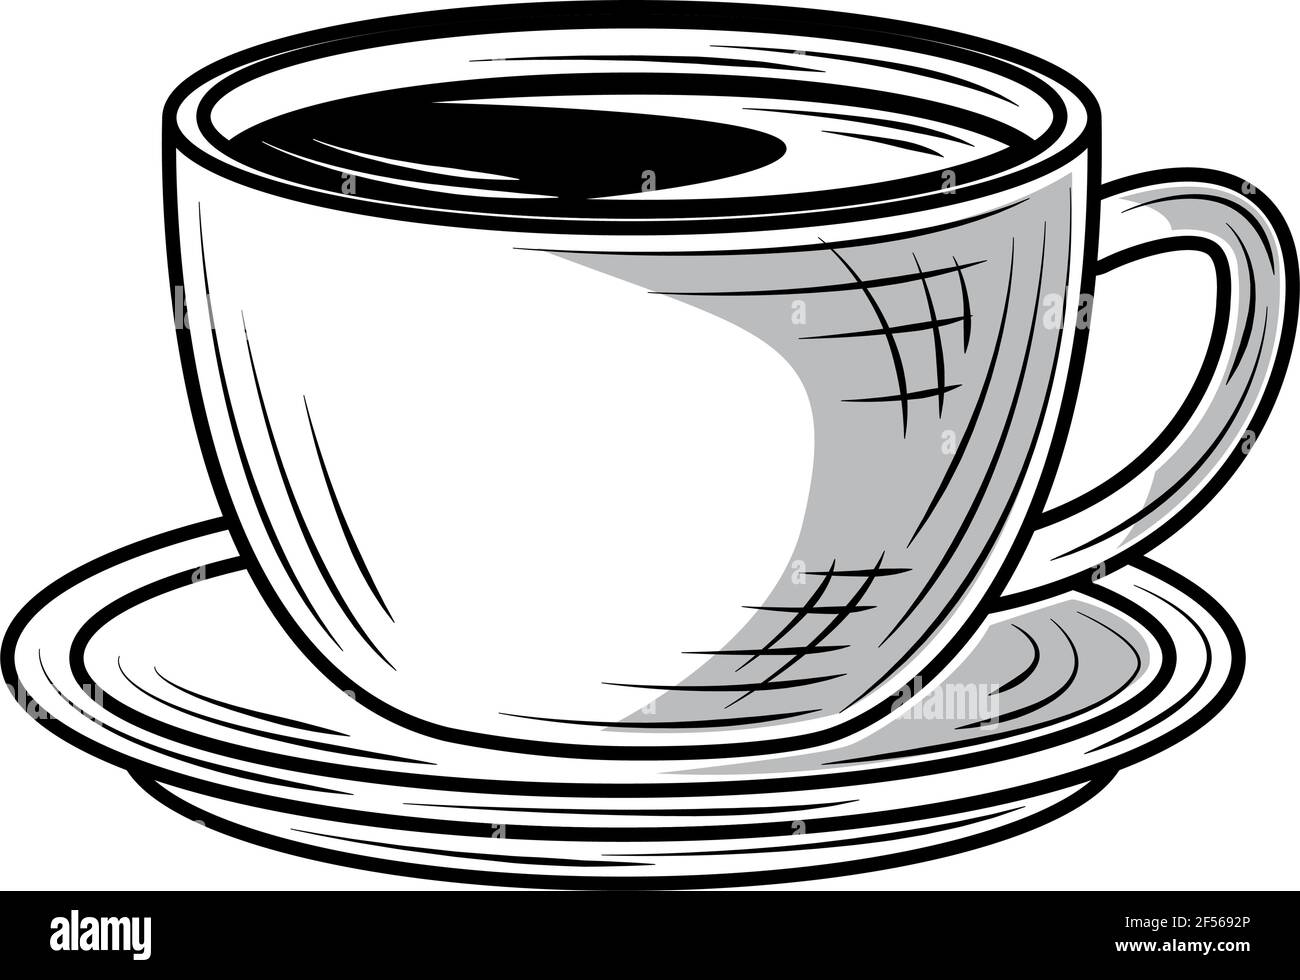 Cup Drawing  How To Draw A Cup Step By Step